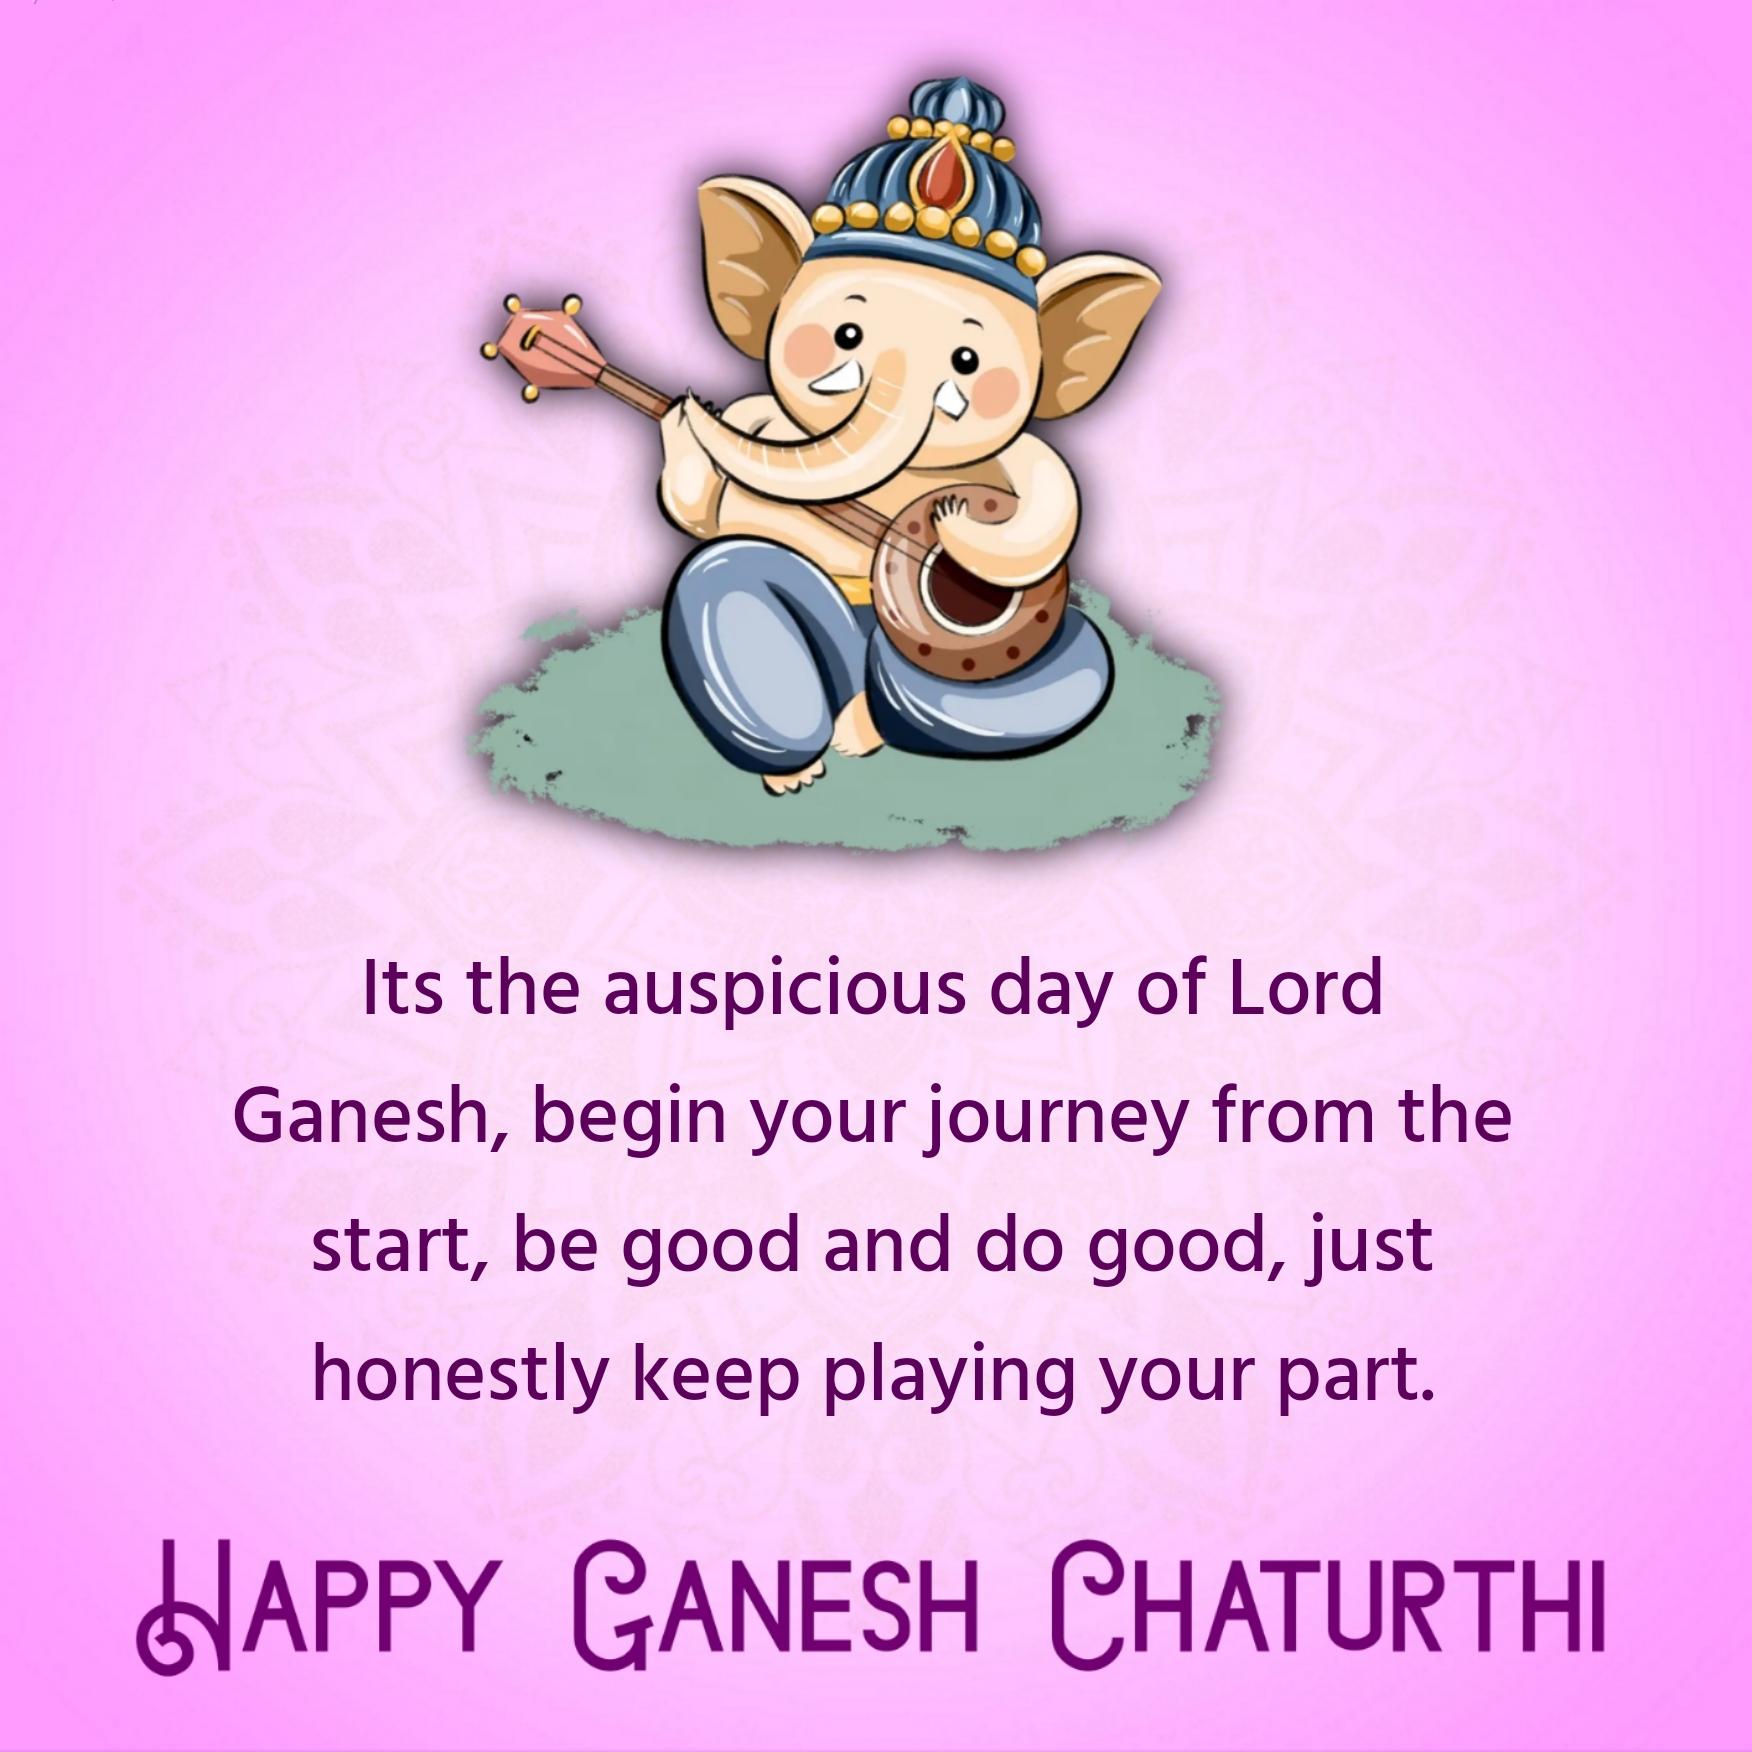 Its the auspicious day of Lord Ganesh